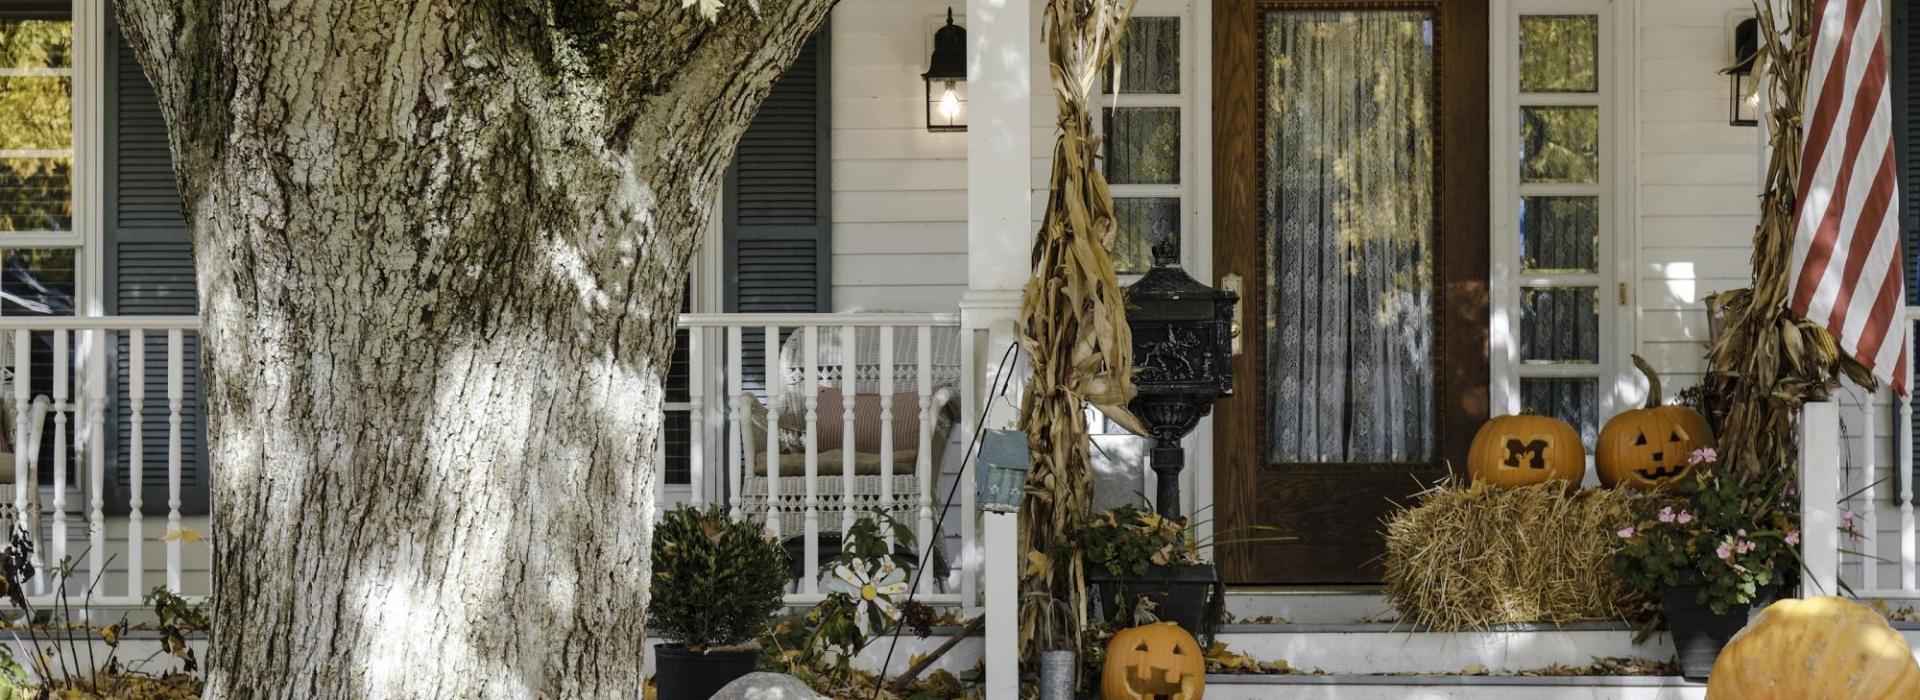 Real Estate home with Pumpkins on the porch